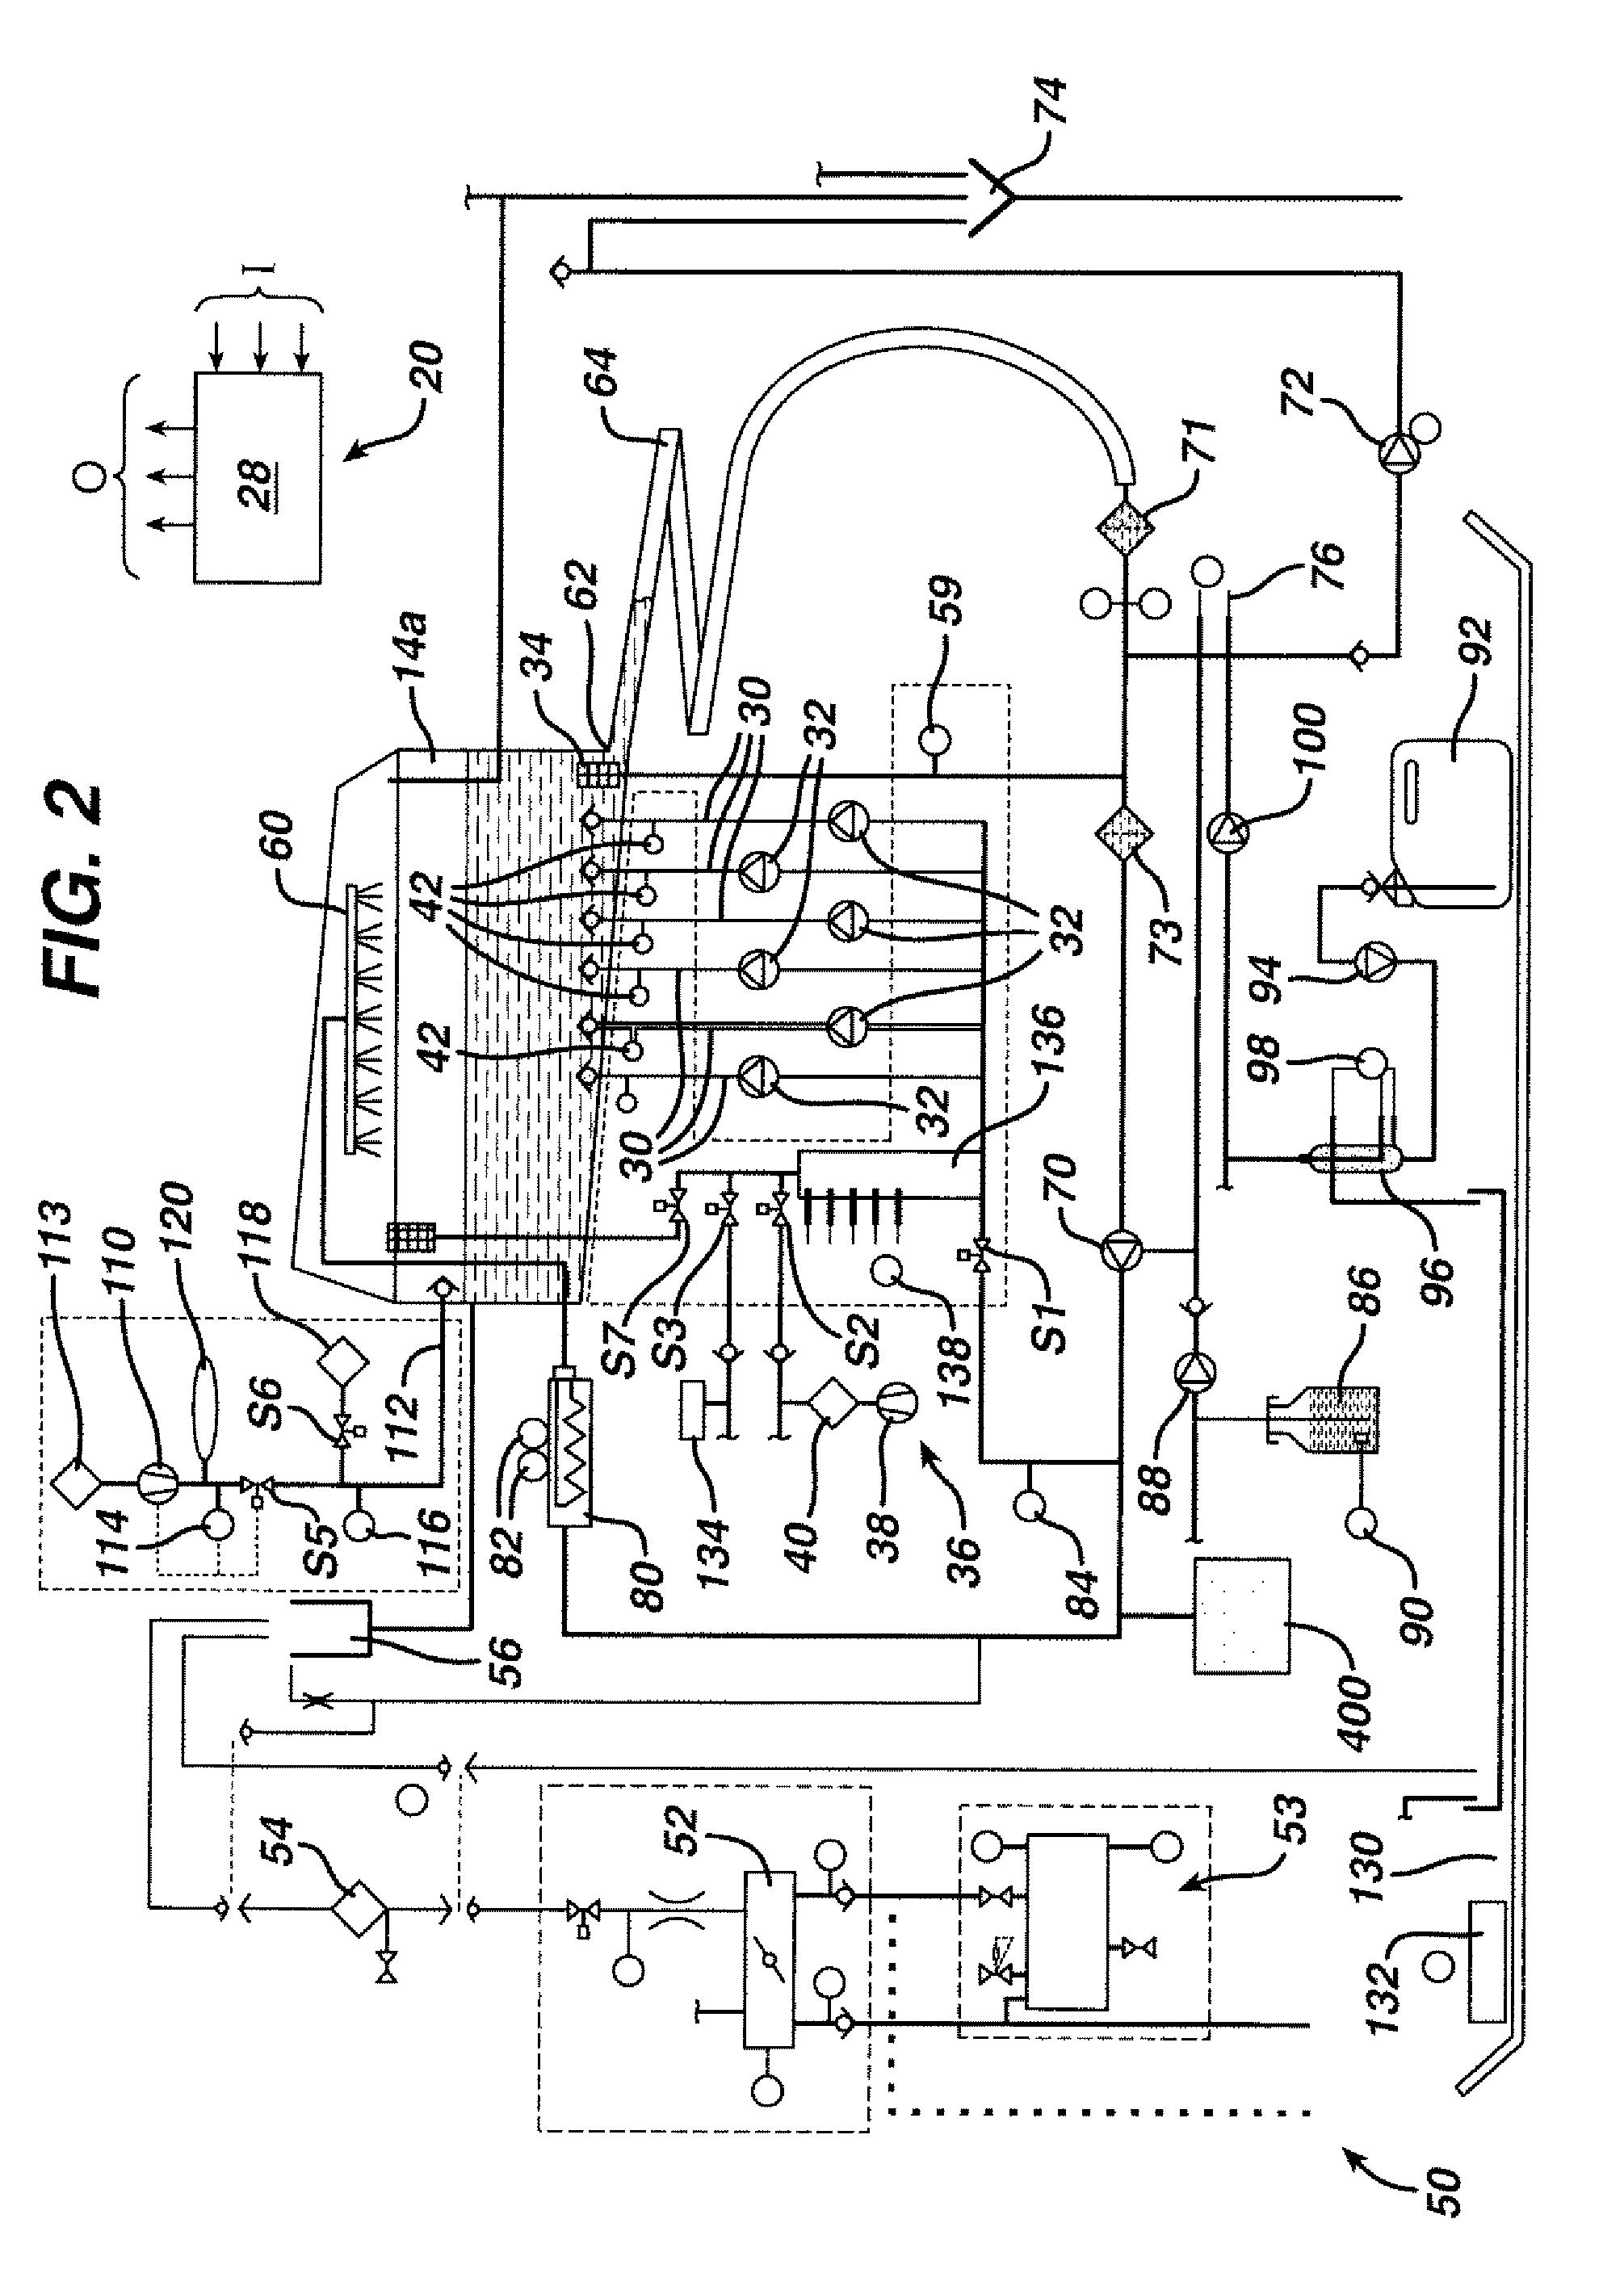 Automated endoscope reprocessor germicide concentration monitoring system and method